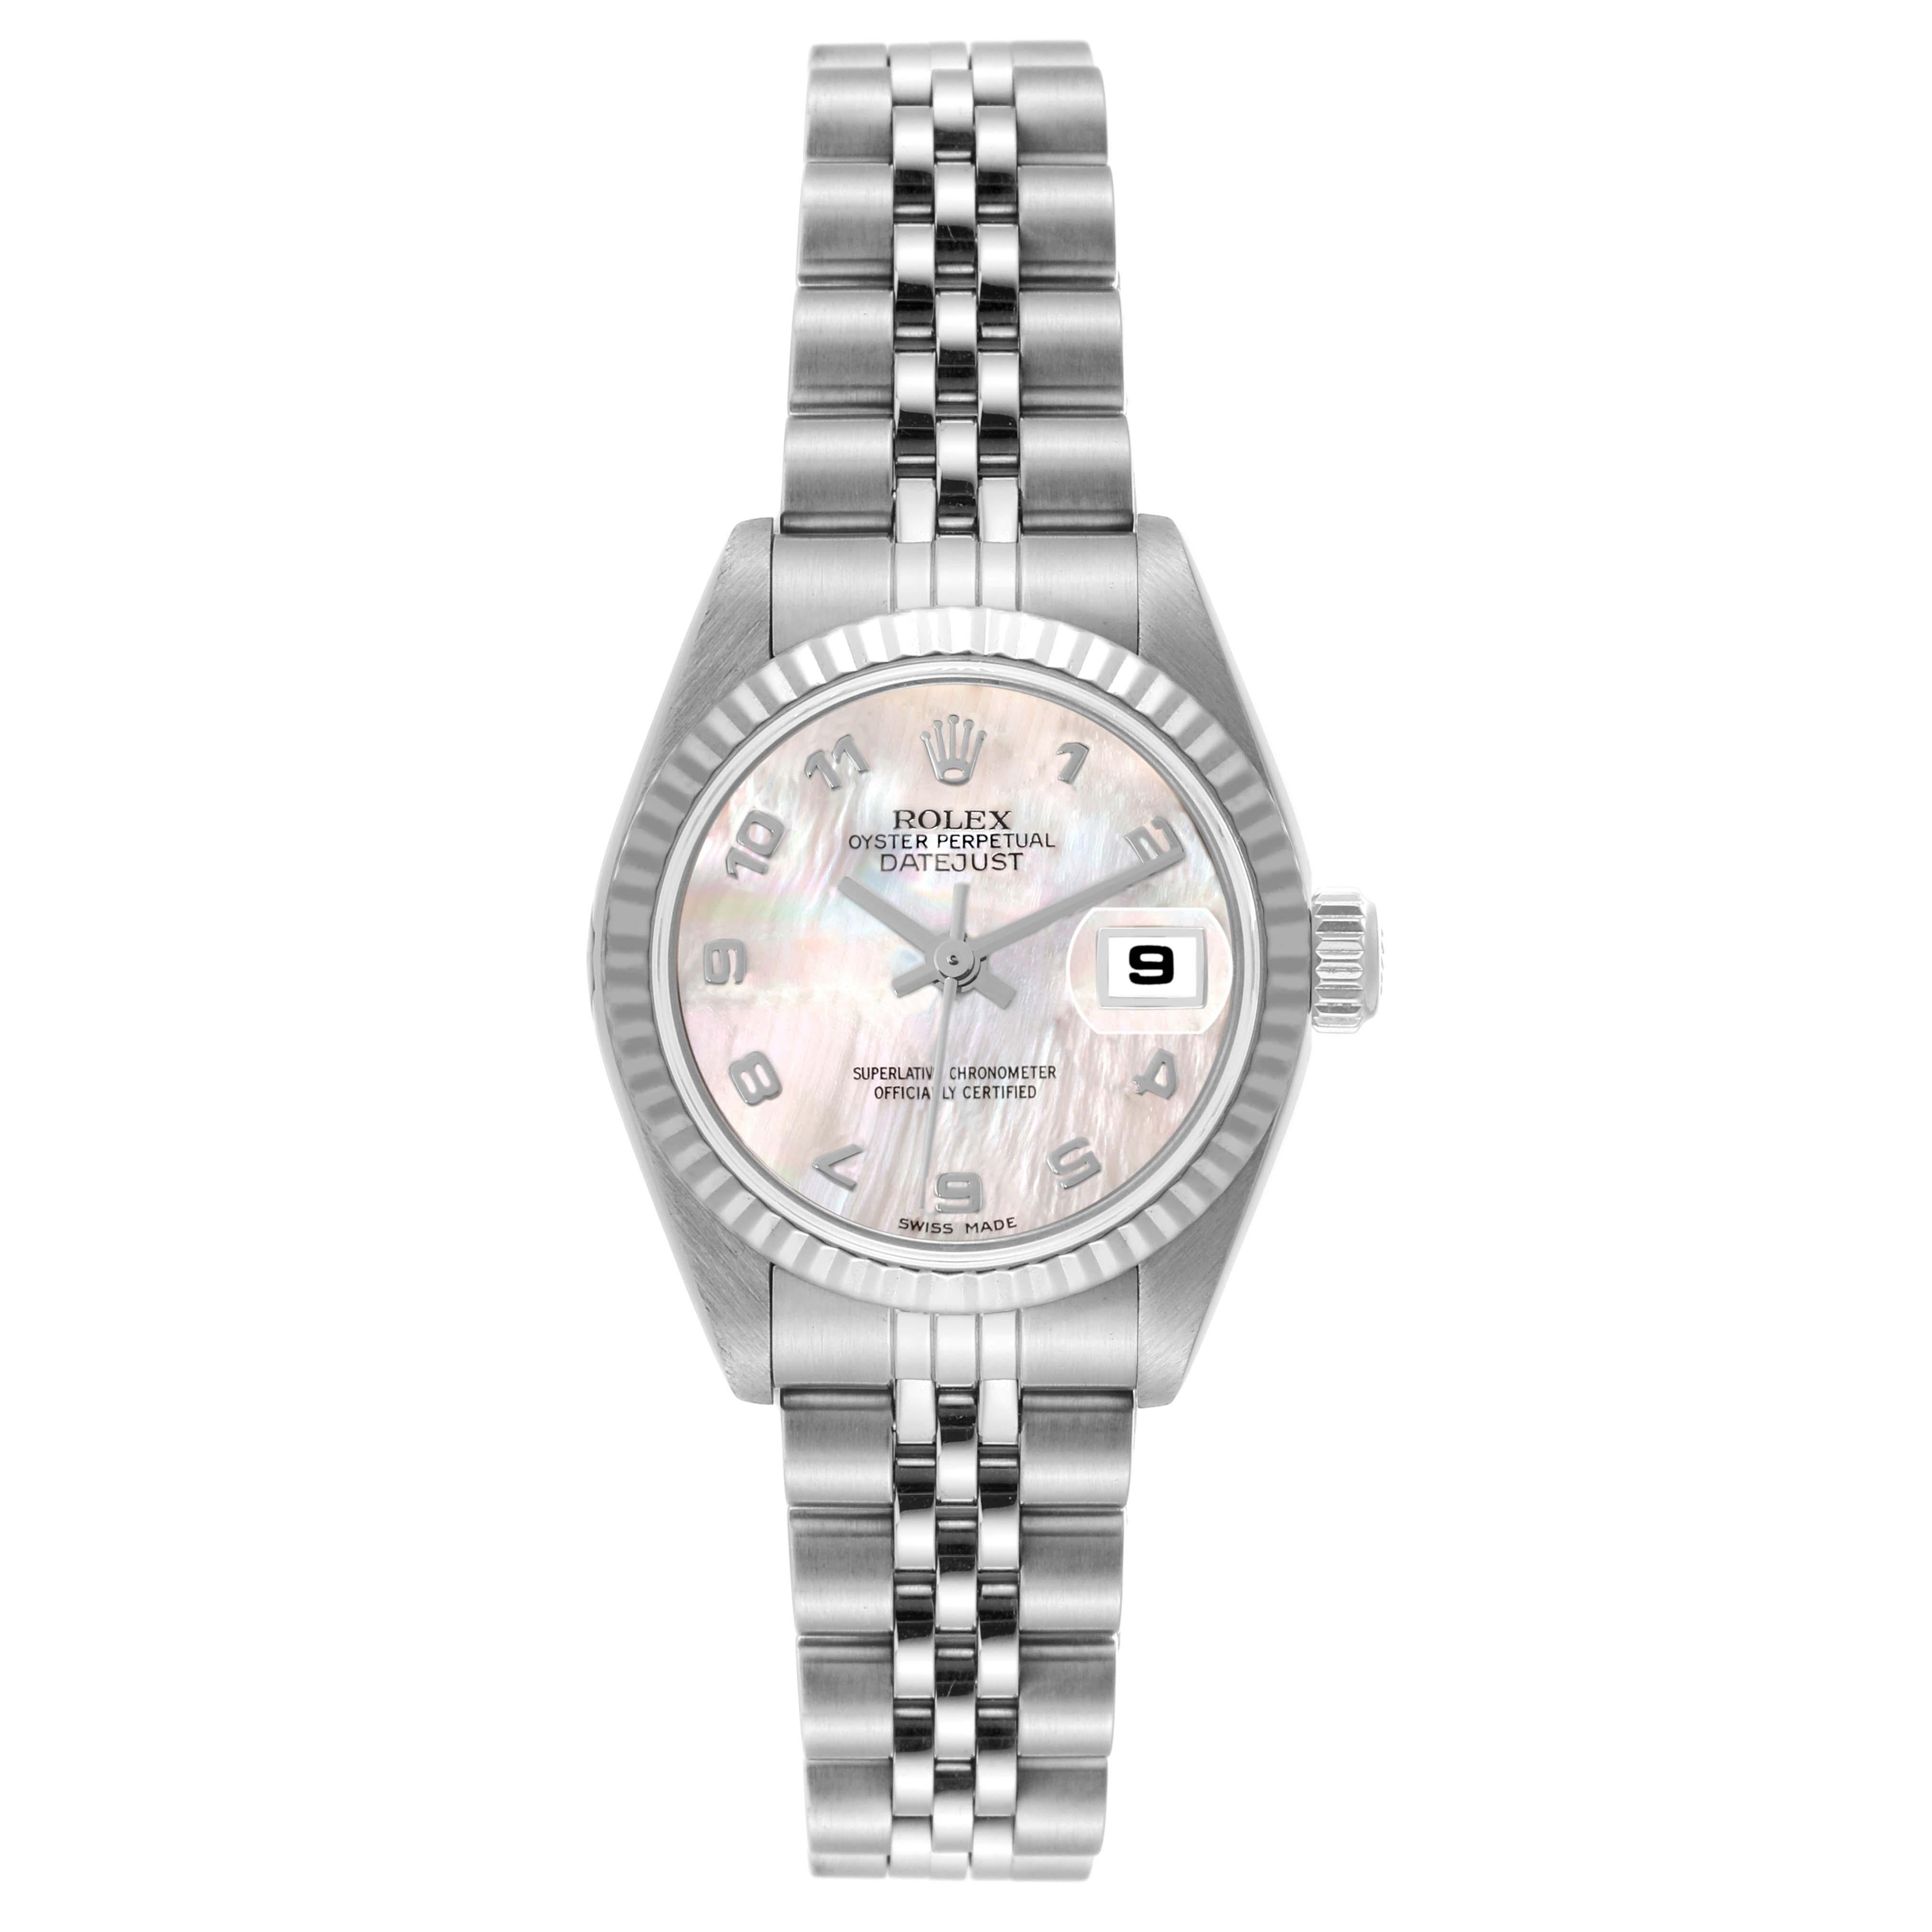 Rolex Datejust Steel White Gold Mother Of Pearl Ladies Watch 79174. Officially certified chronometer automatic self-winding movement. Stainless steel oyster case 26.0 mm in diameter. Rolex logo on a crown. 18K white gold fluted bezel. Scratch